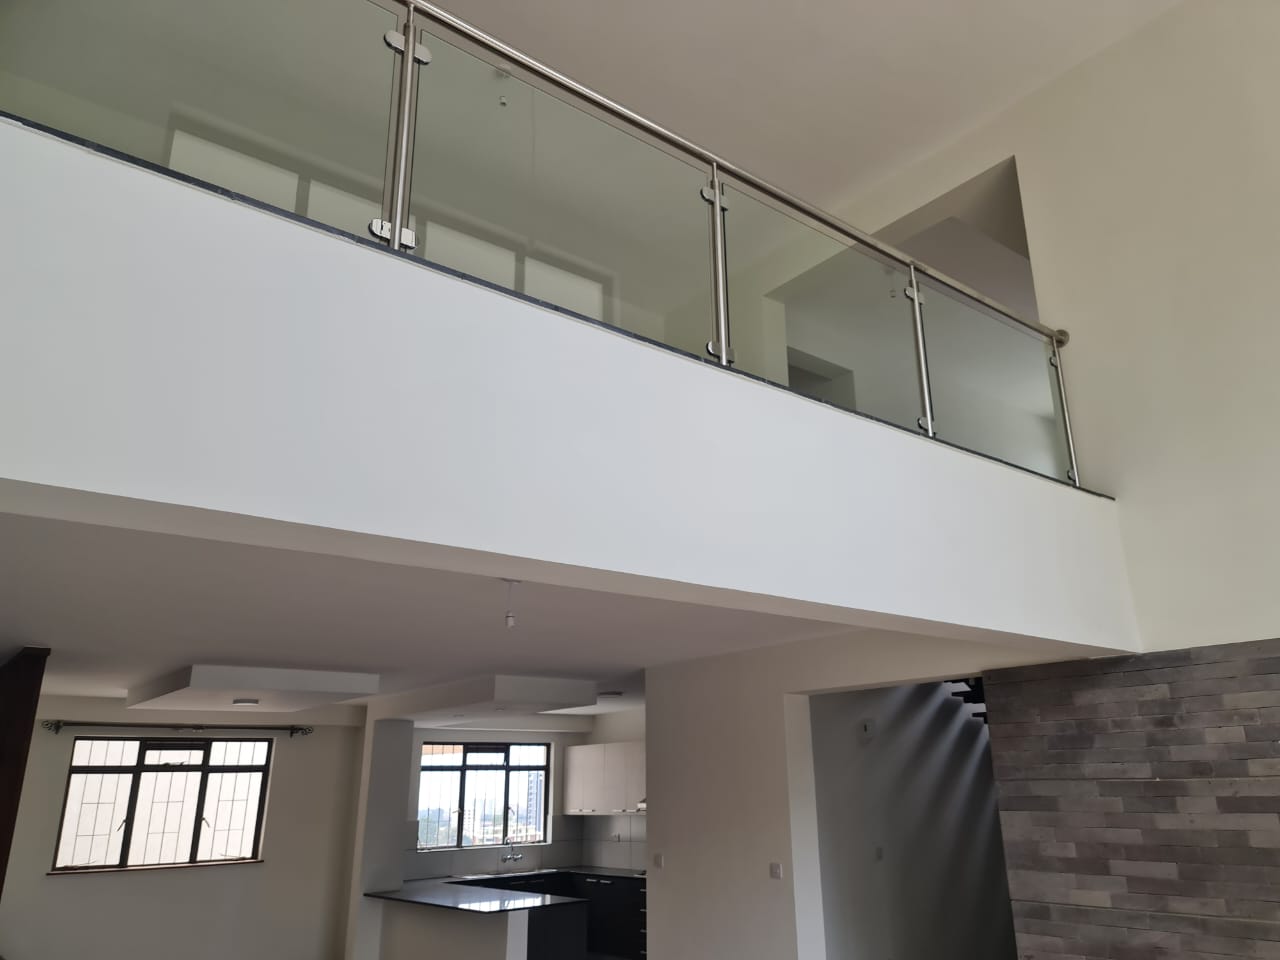 4 Bedroom New Penthouse for Rent in the heart of Westlands with great views, lift, borehole, power backup generator For Rent at Ksh160k (21)